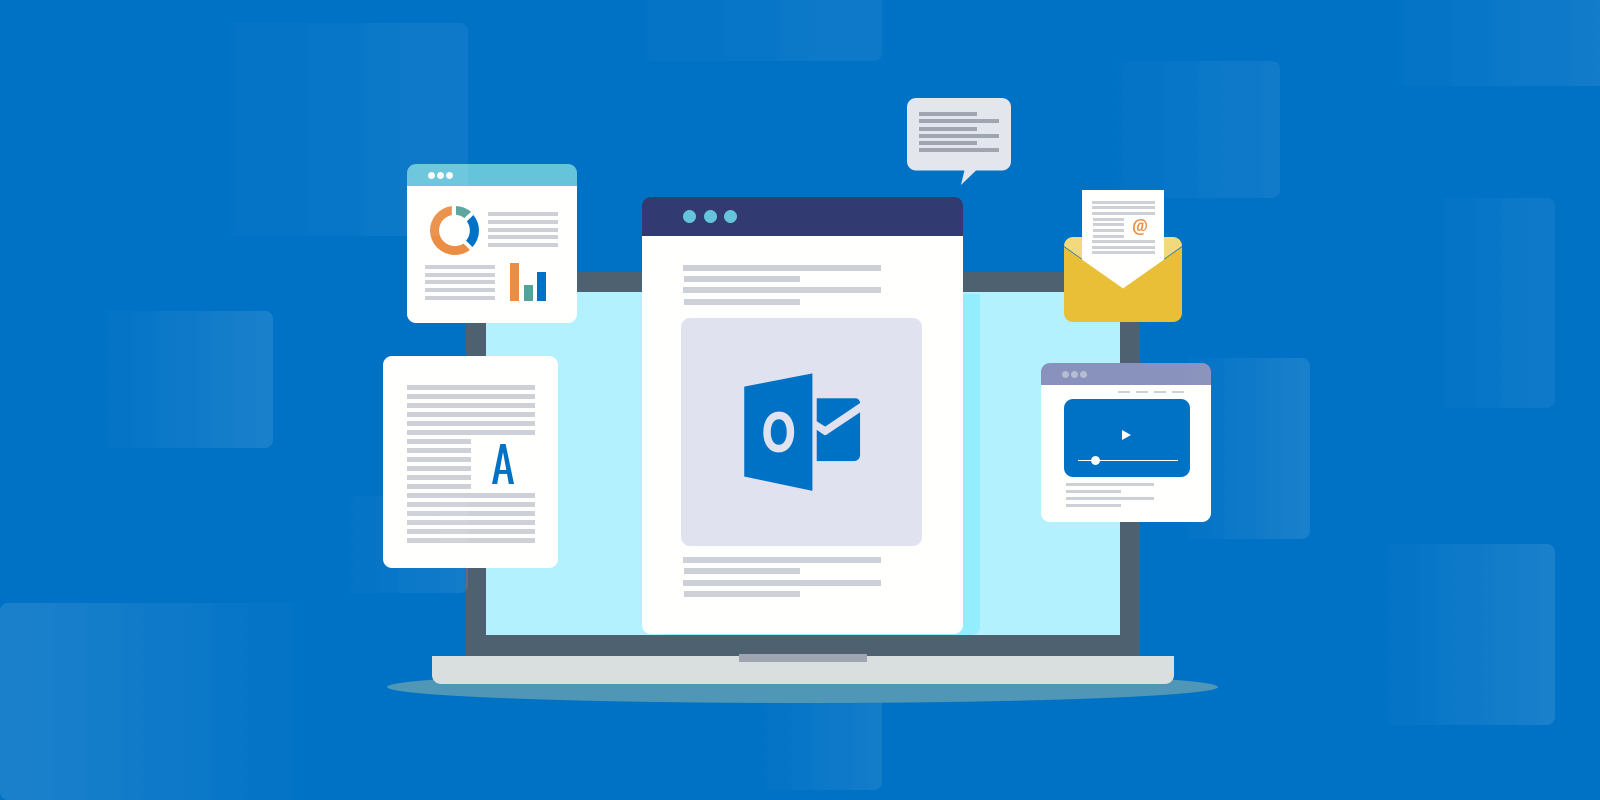 How To Make An Email Template In Outlook 